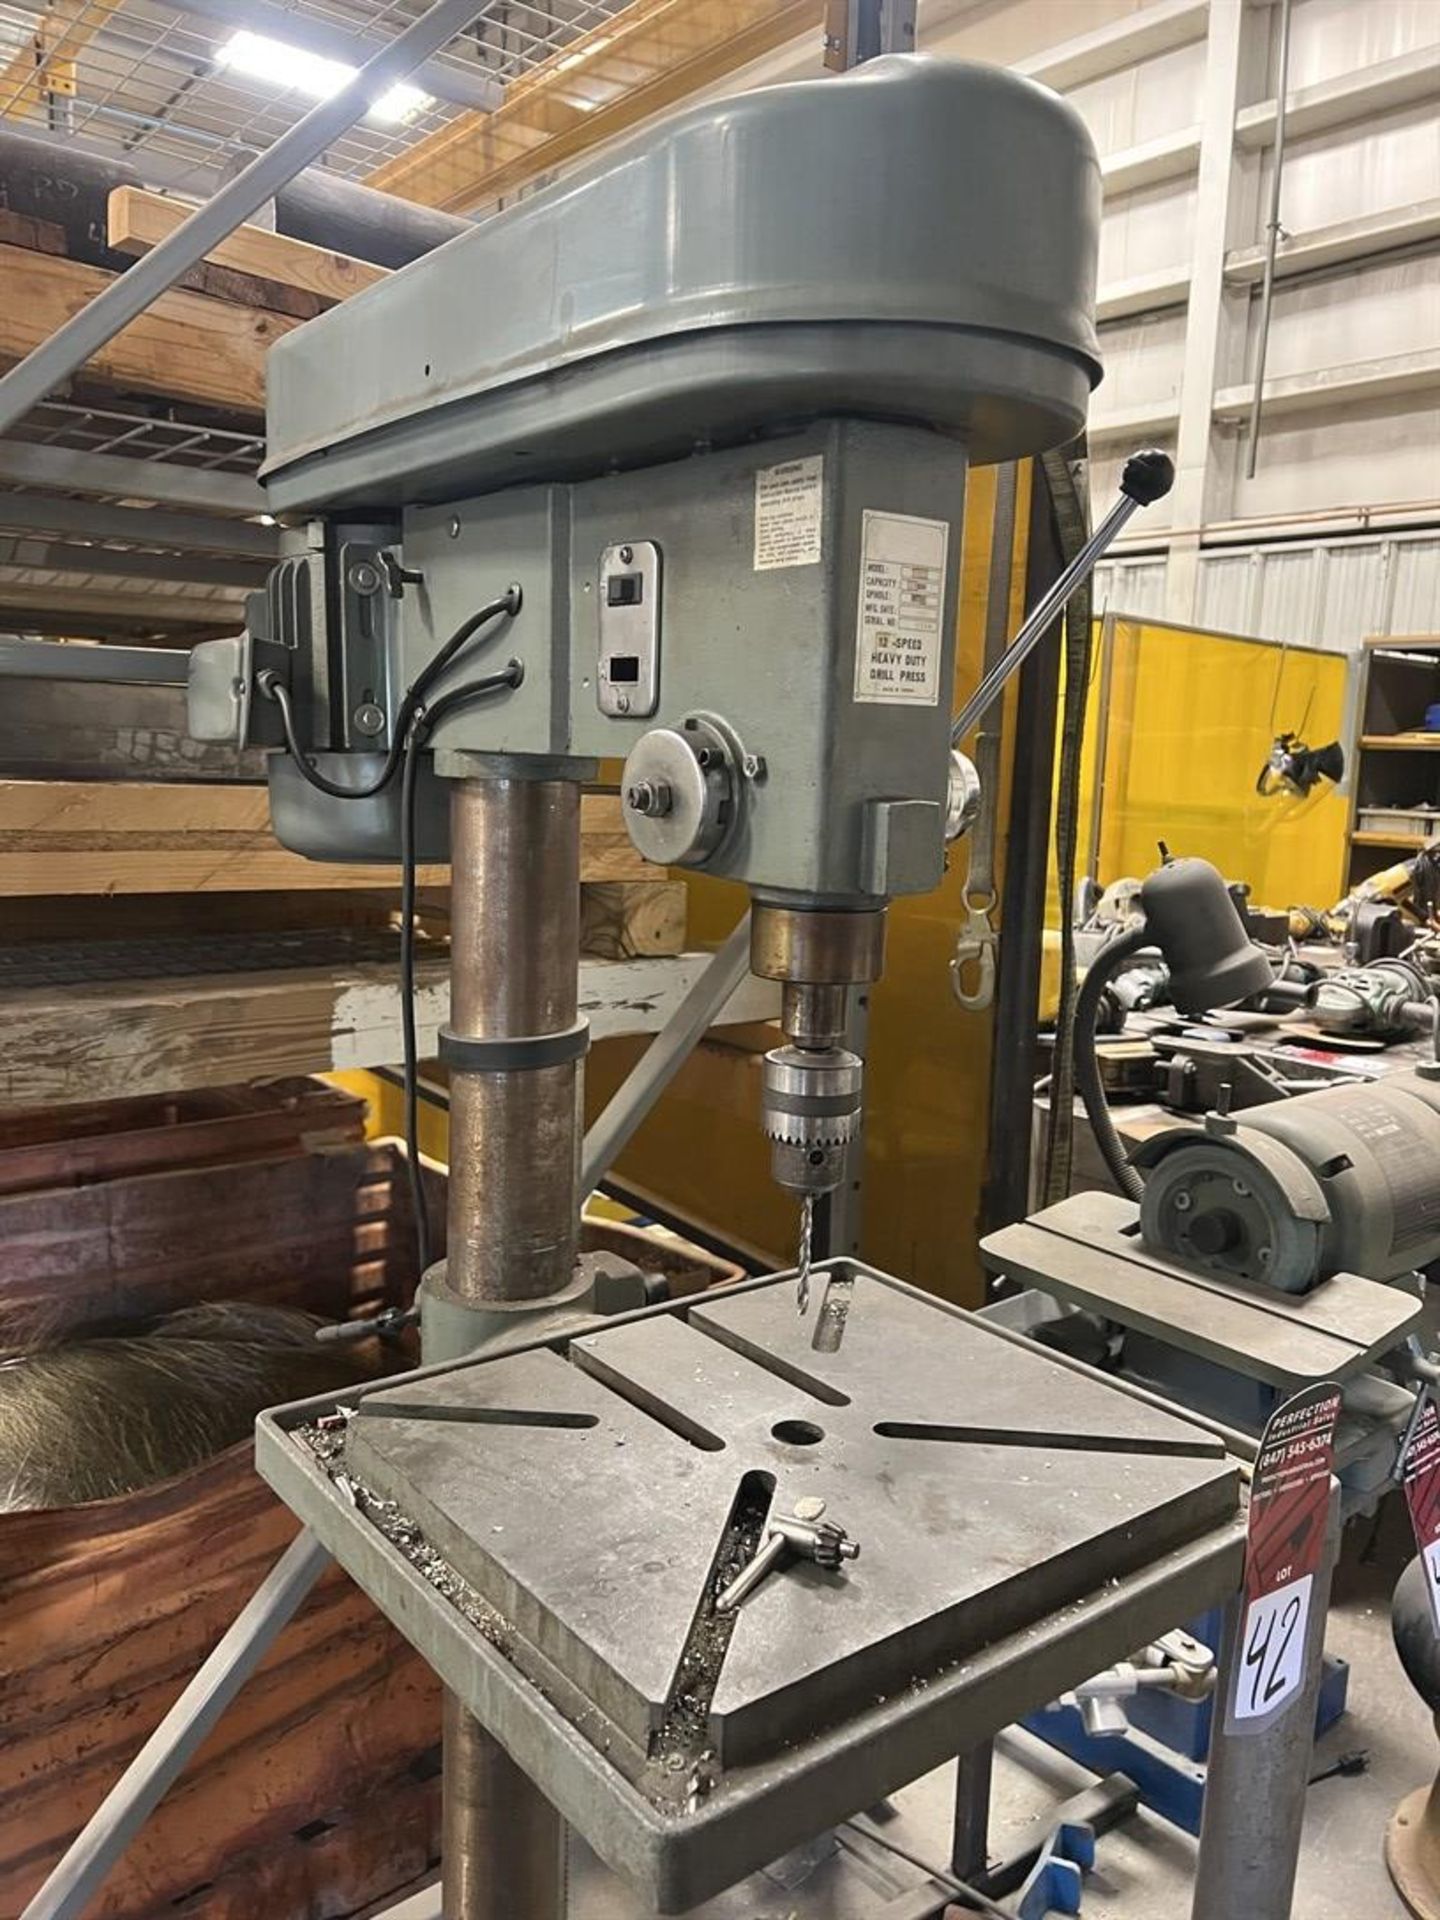 KBC MACHINERY 1002 12-Speed Drill Press, s/n 000543, 13.5" x 16" Table, 11" Throat, 1 HP - Image 3 of 7